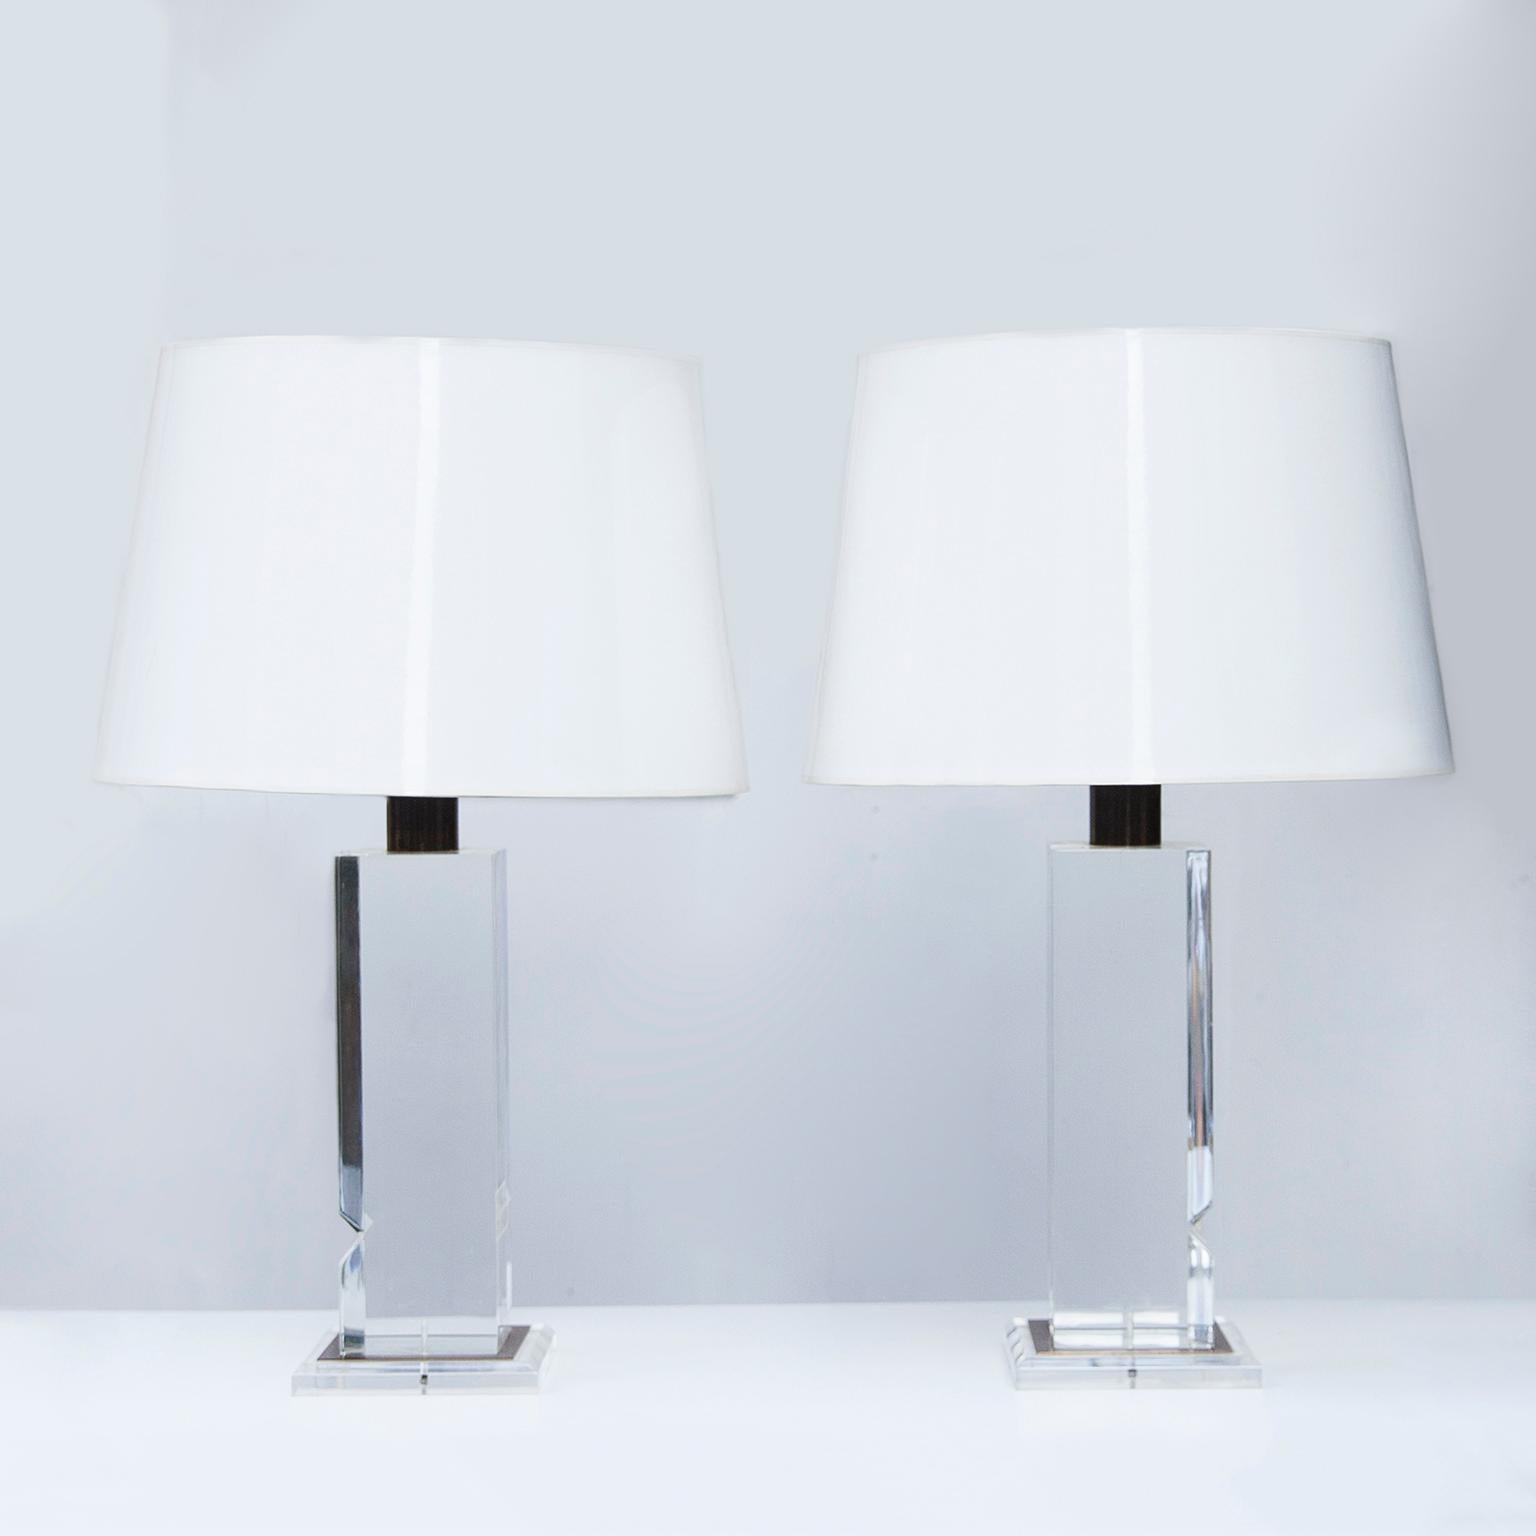 Wonderful French Lucite table lamps new white and inside golden paper shades, France 1970s.